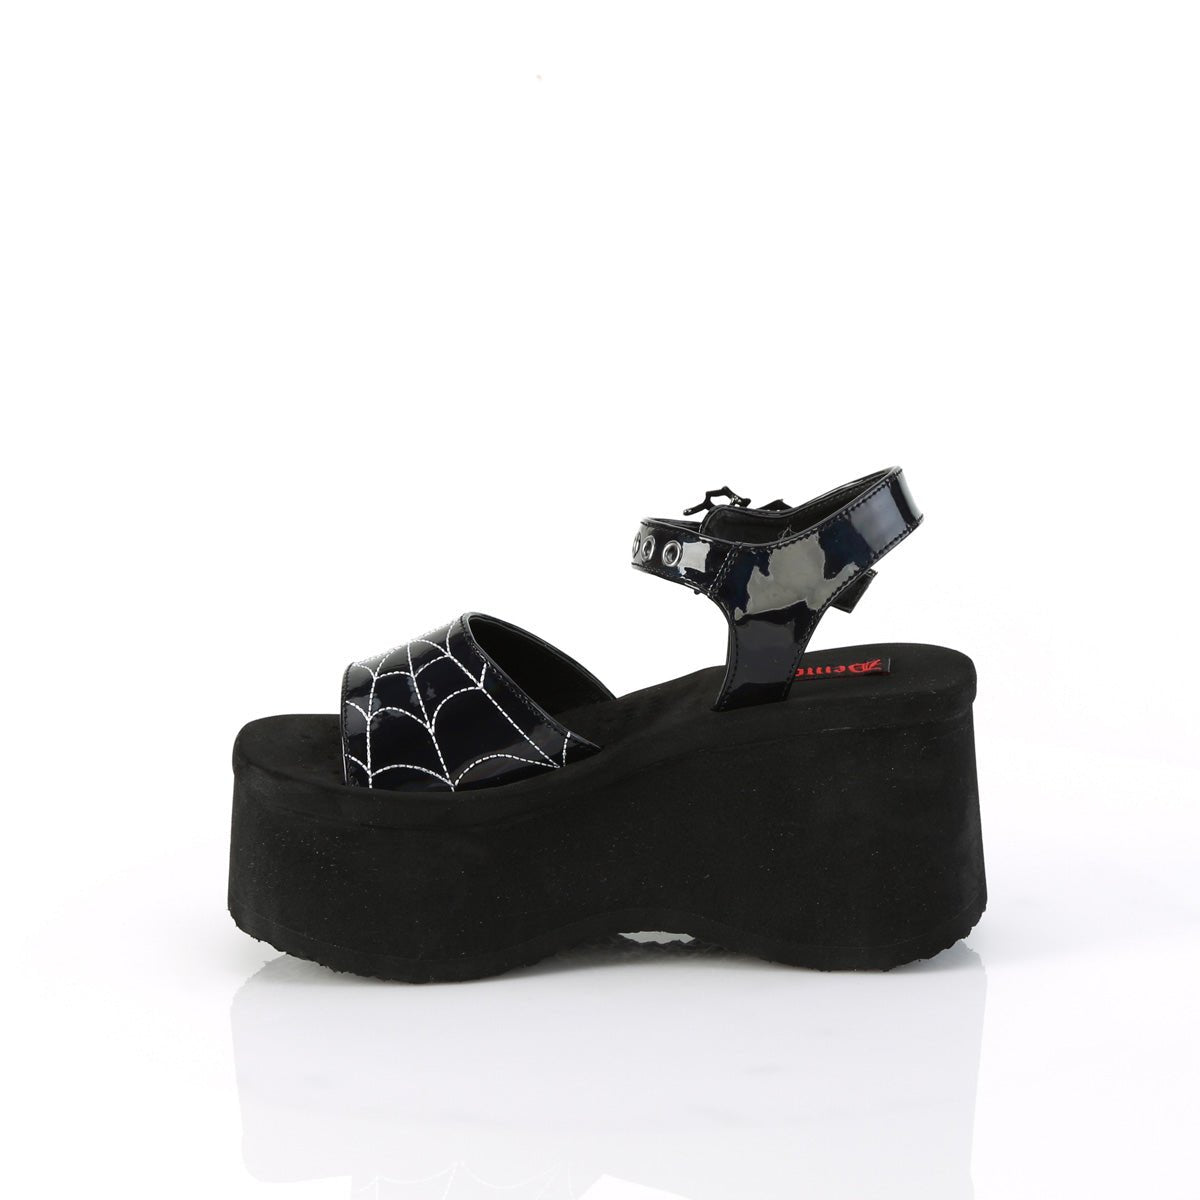 Too Fast | Demonia Funn 10 | Black Holographic Patent Leather Women's Sandals